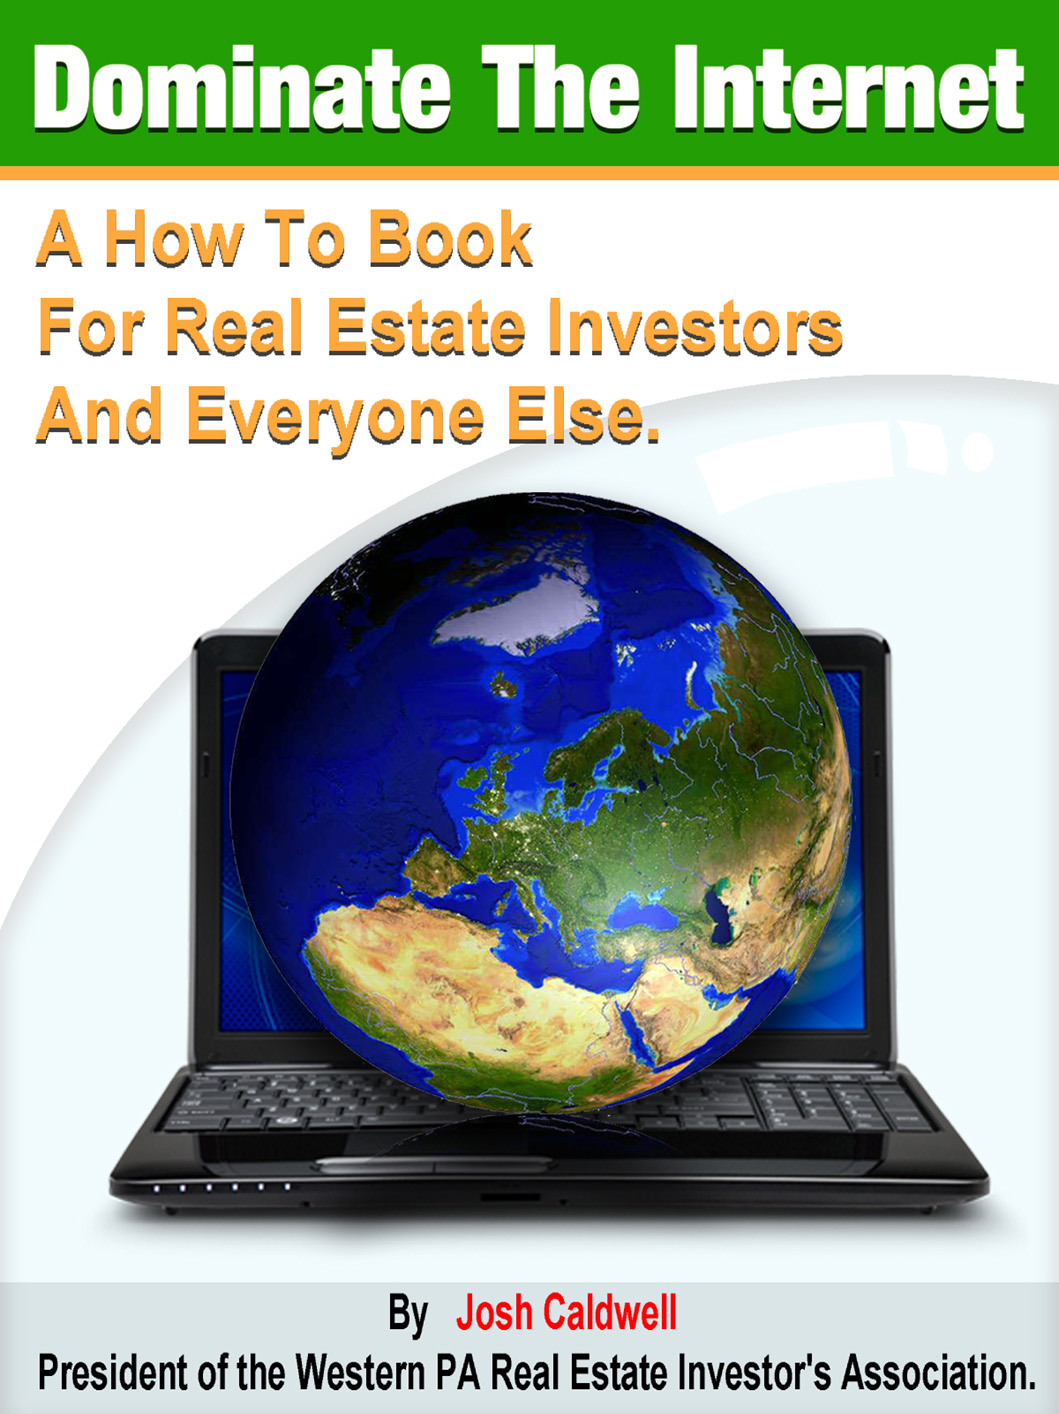 How to make money on the internet: a How to Book for Real Estate Investors.